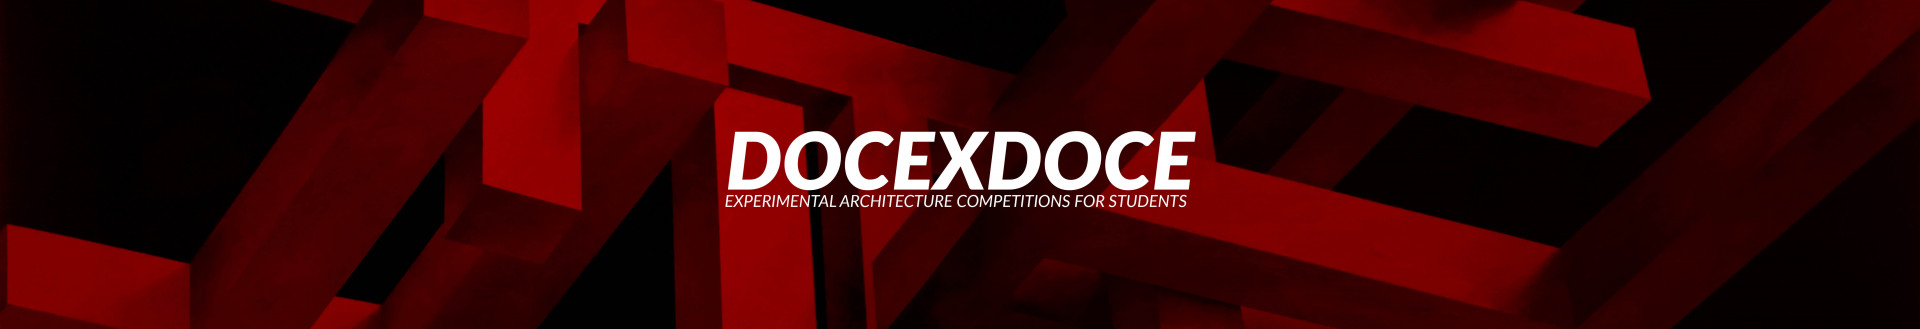 What is DOCEXDOCE?